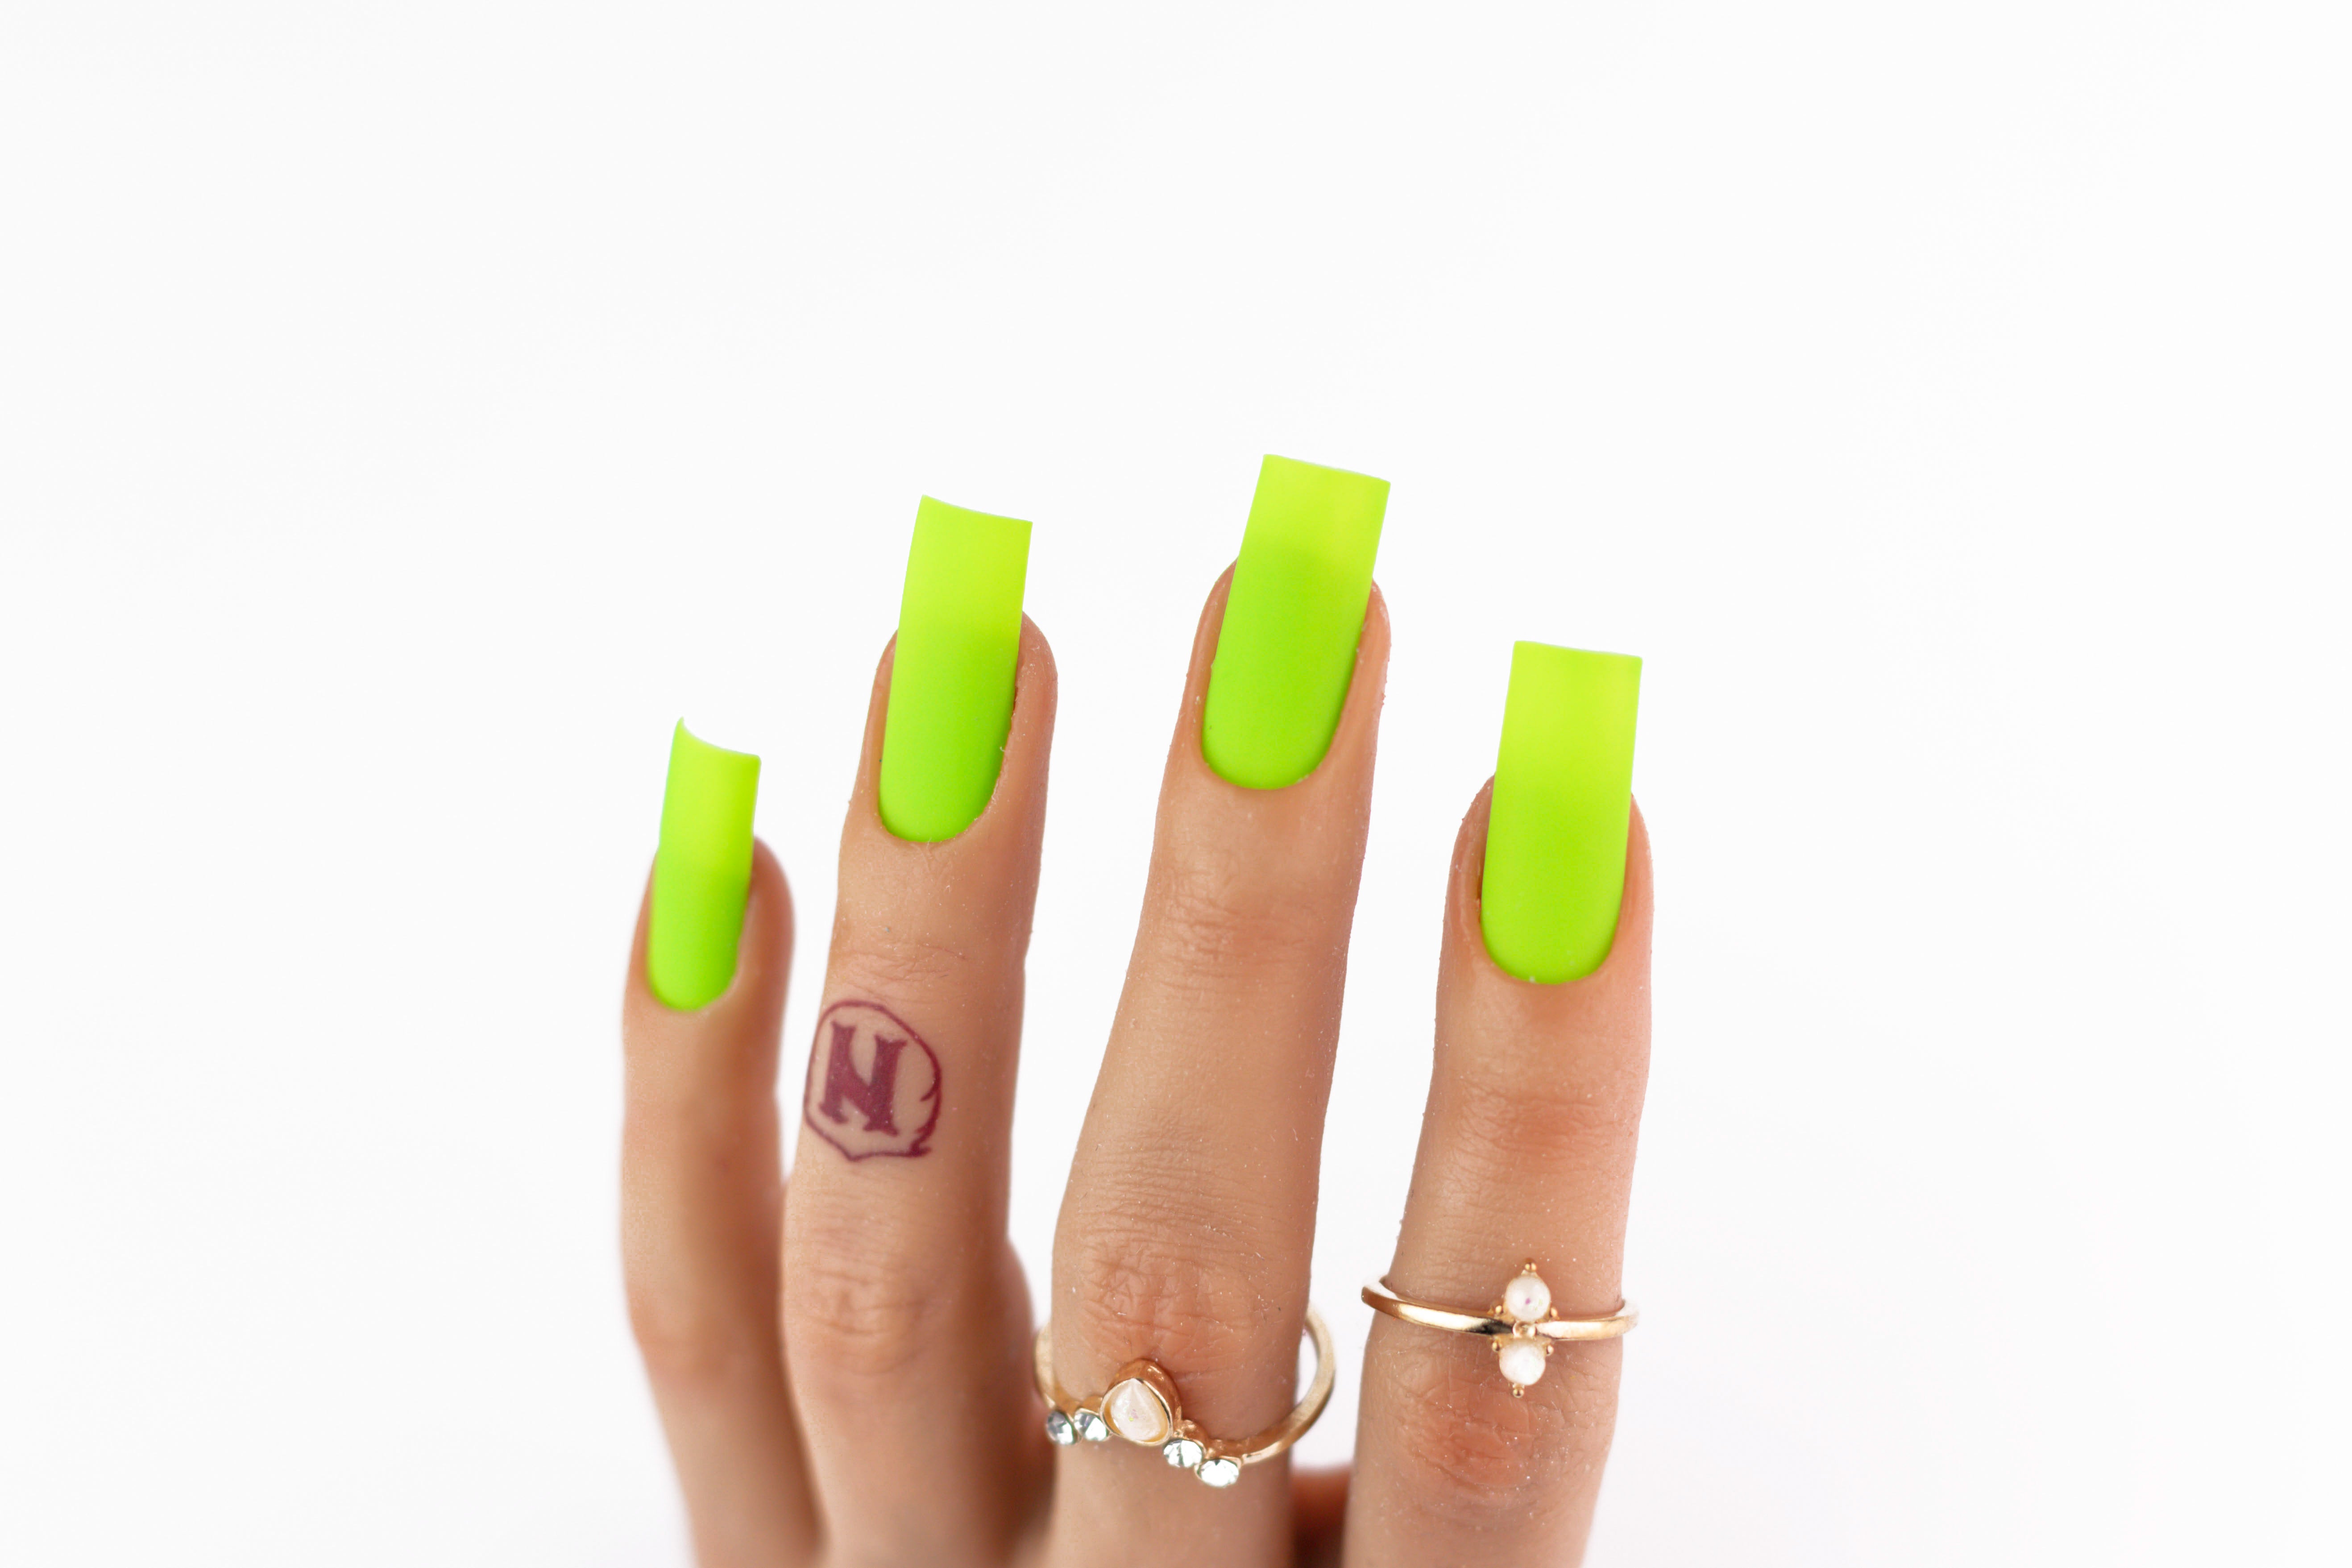 M100 HOT LIME BLING DUO